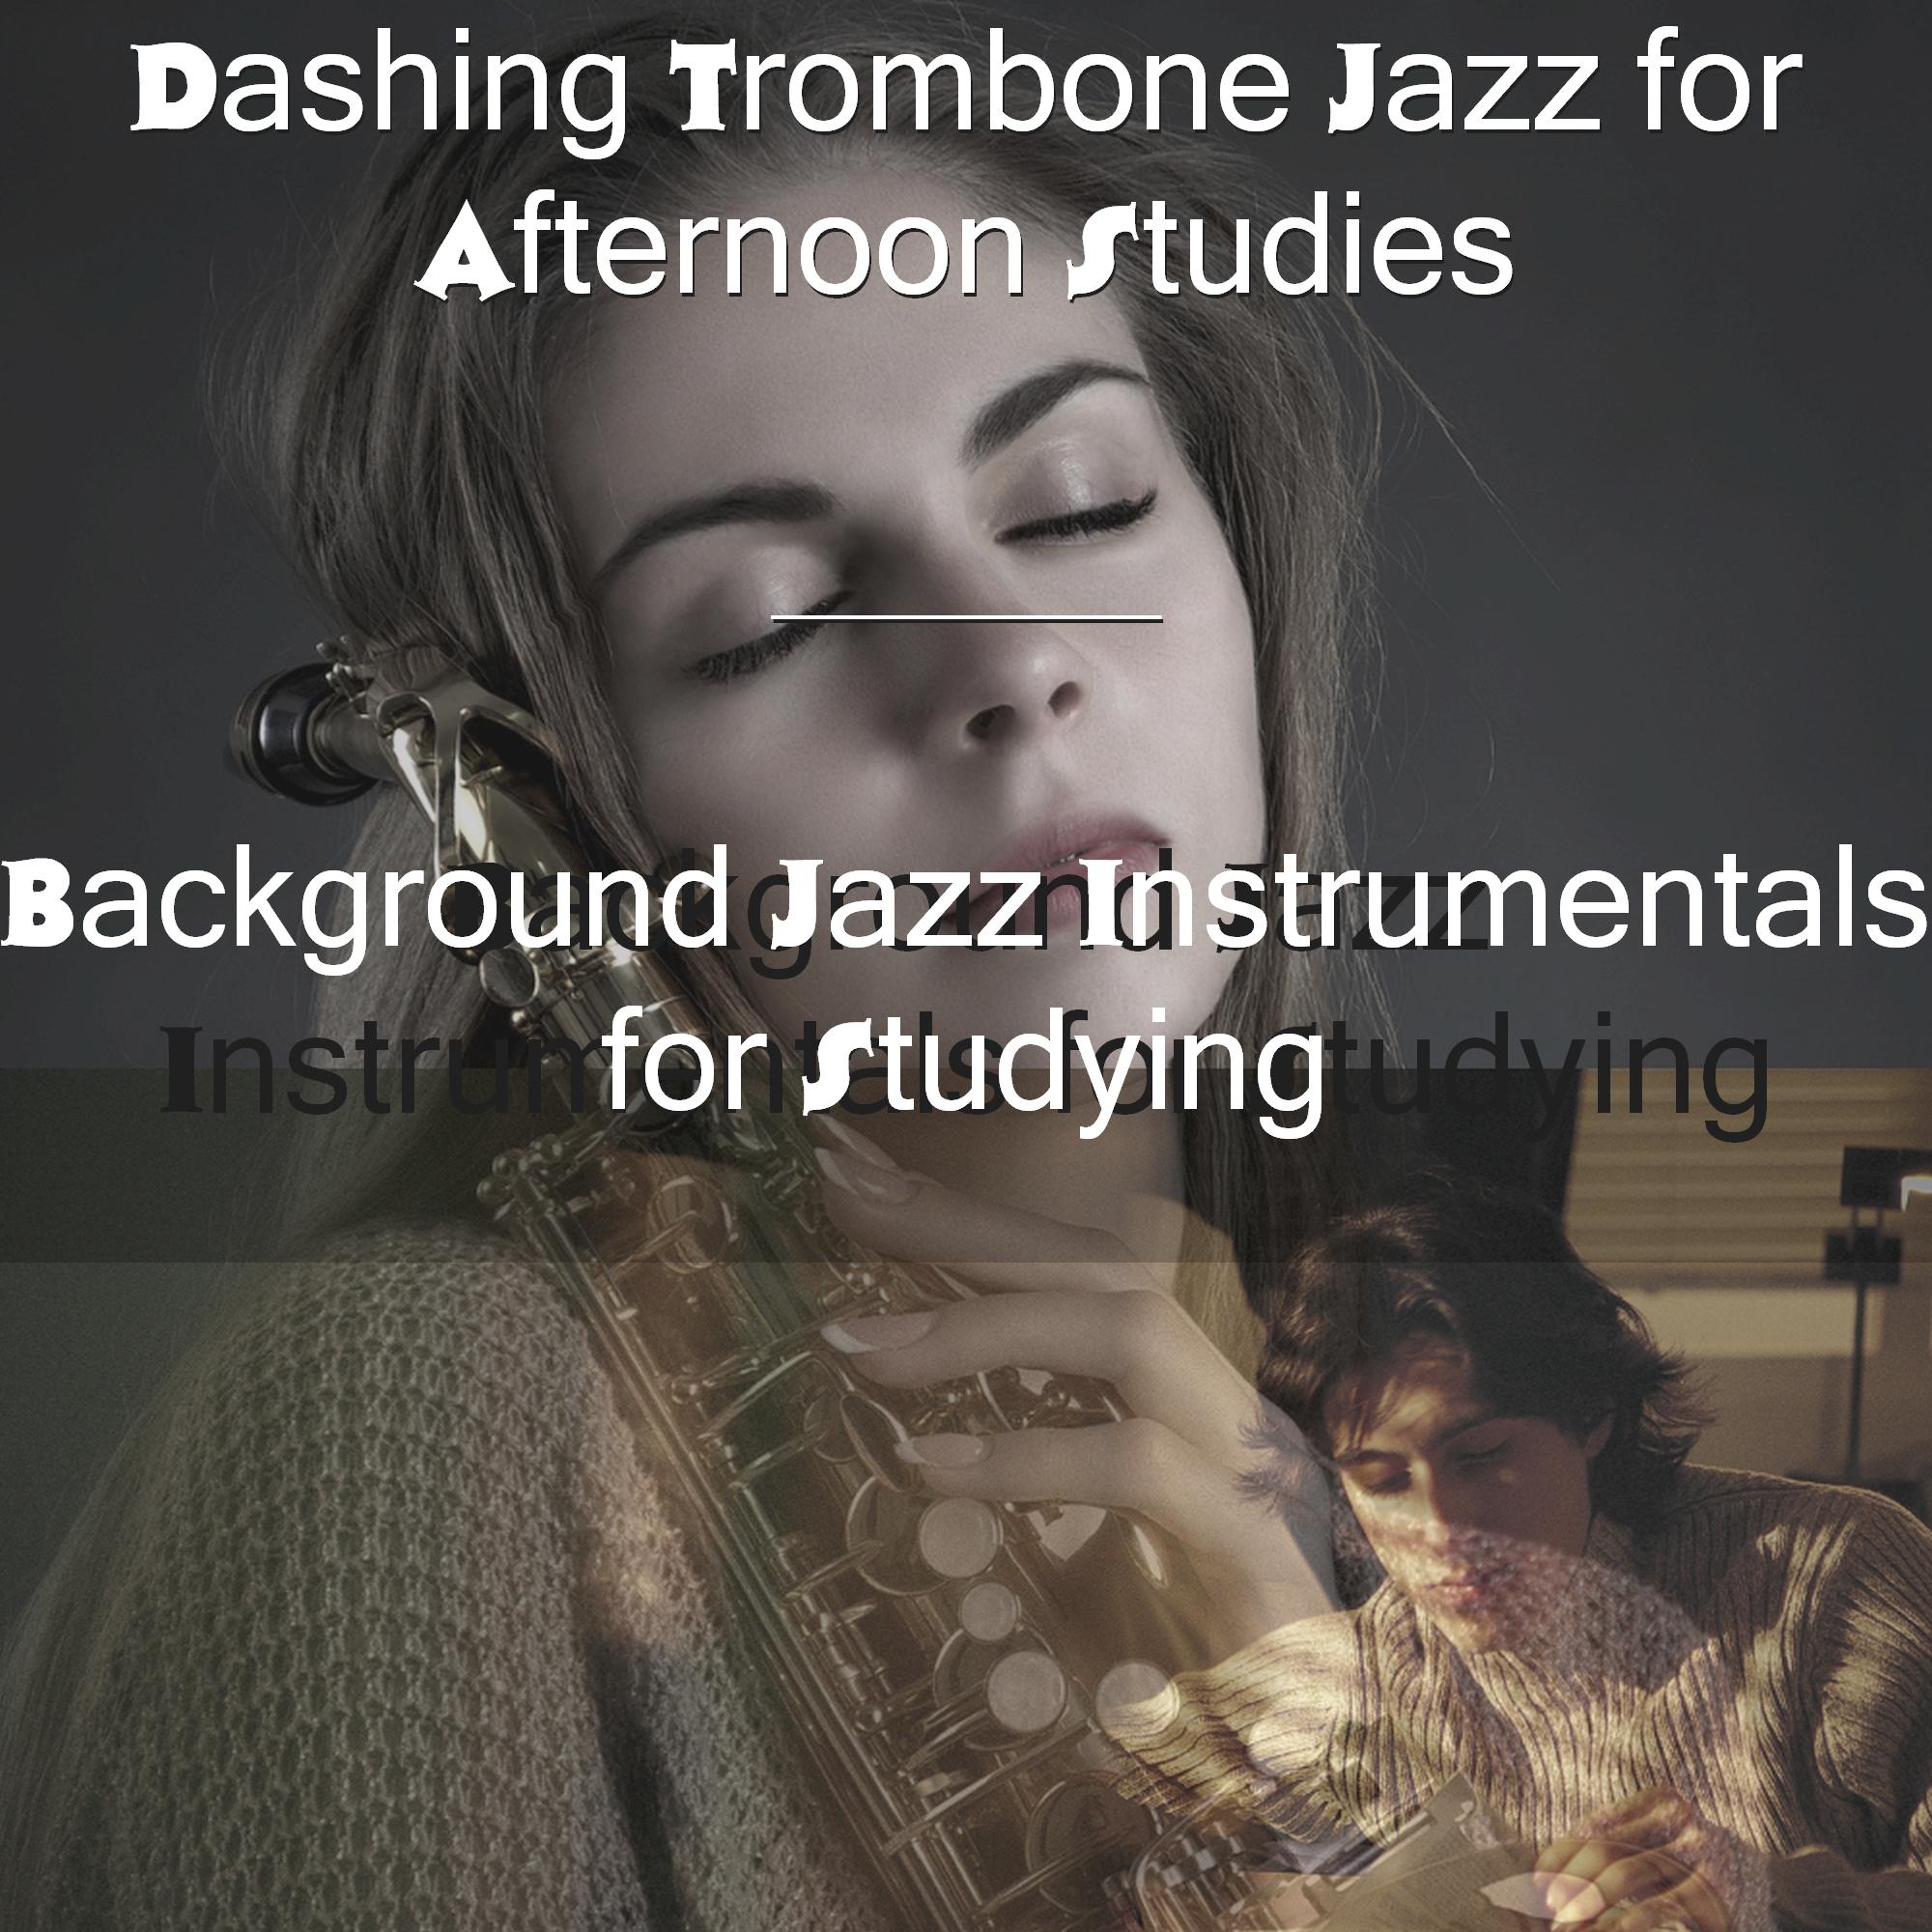 Outgoing Jazz Trombone Quintet for Calm Studies in the Afternoon